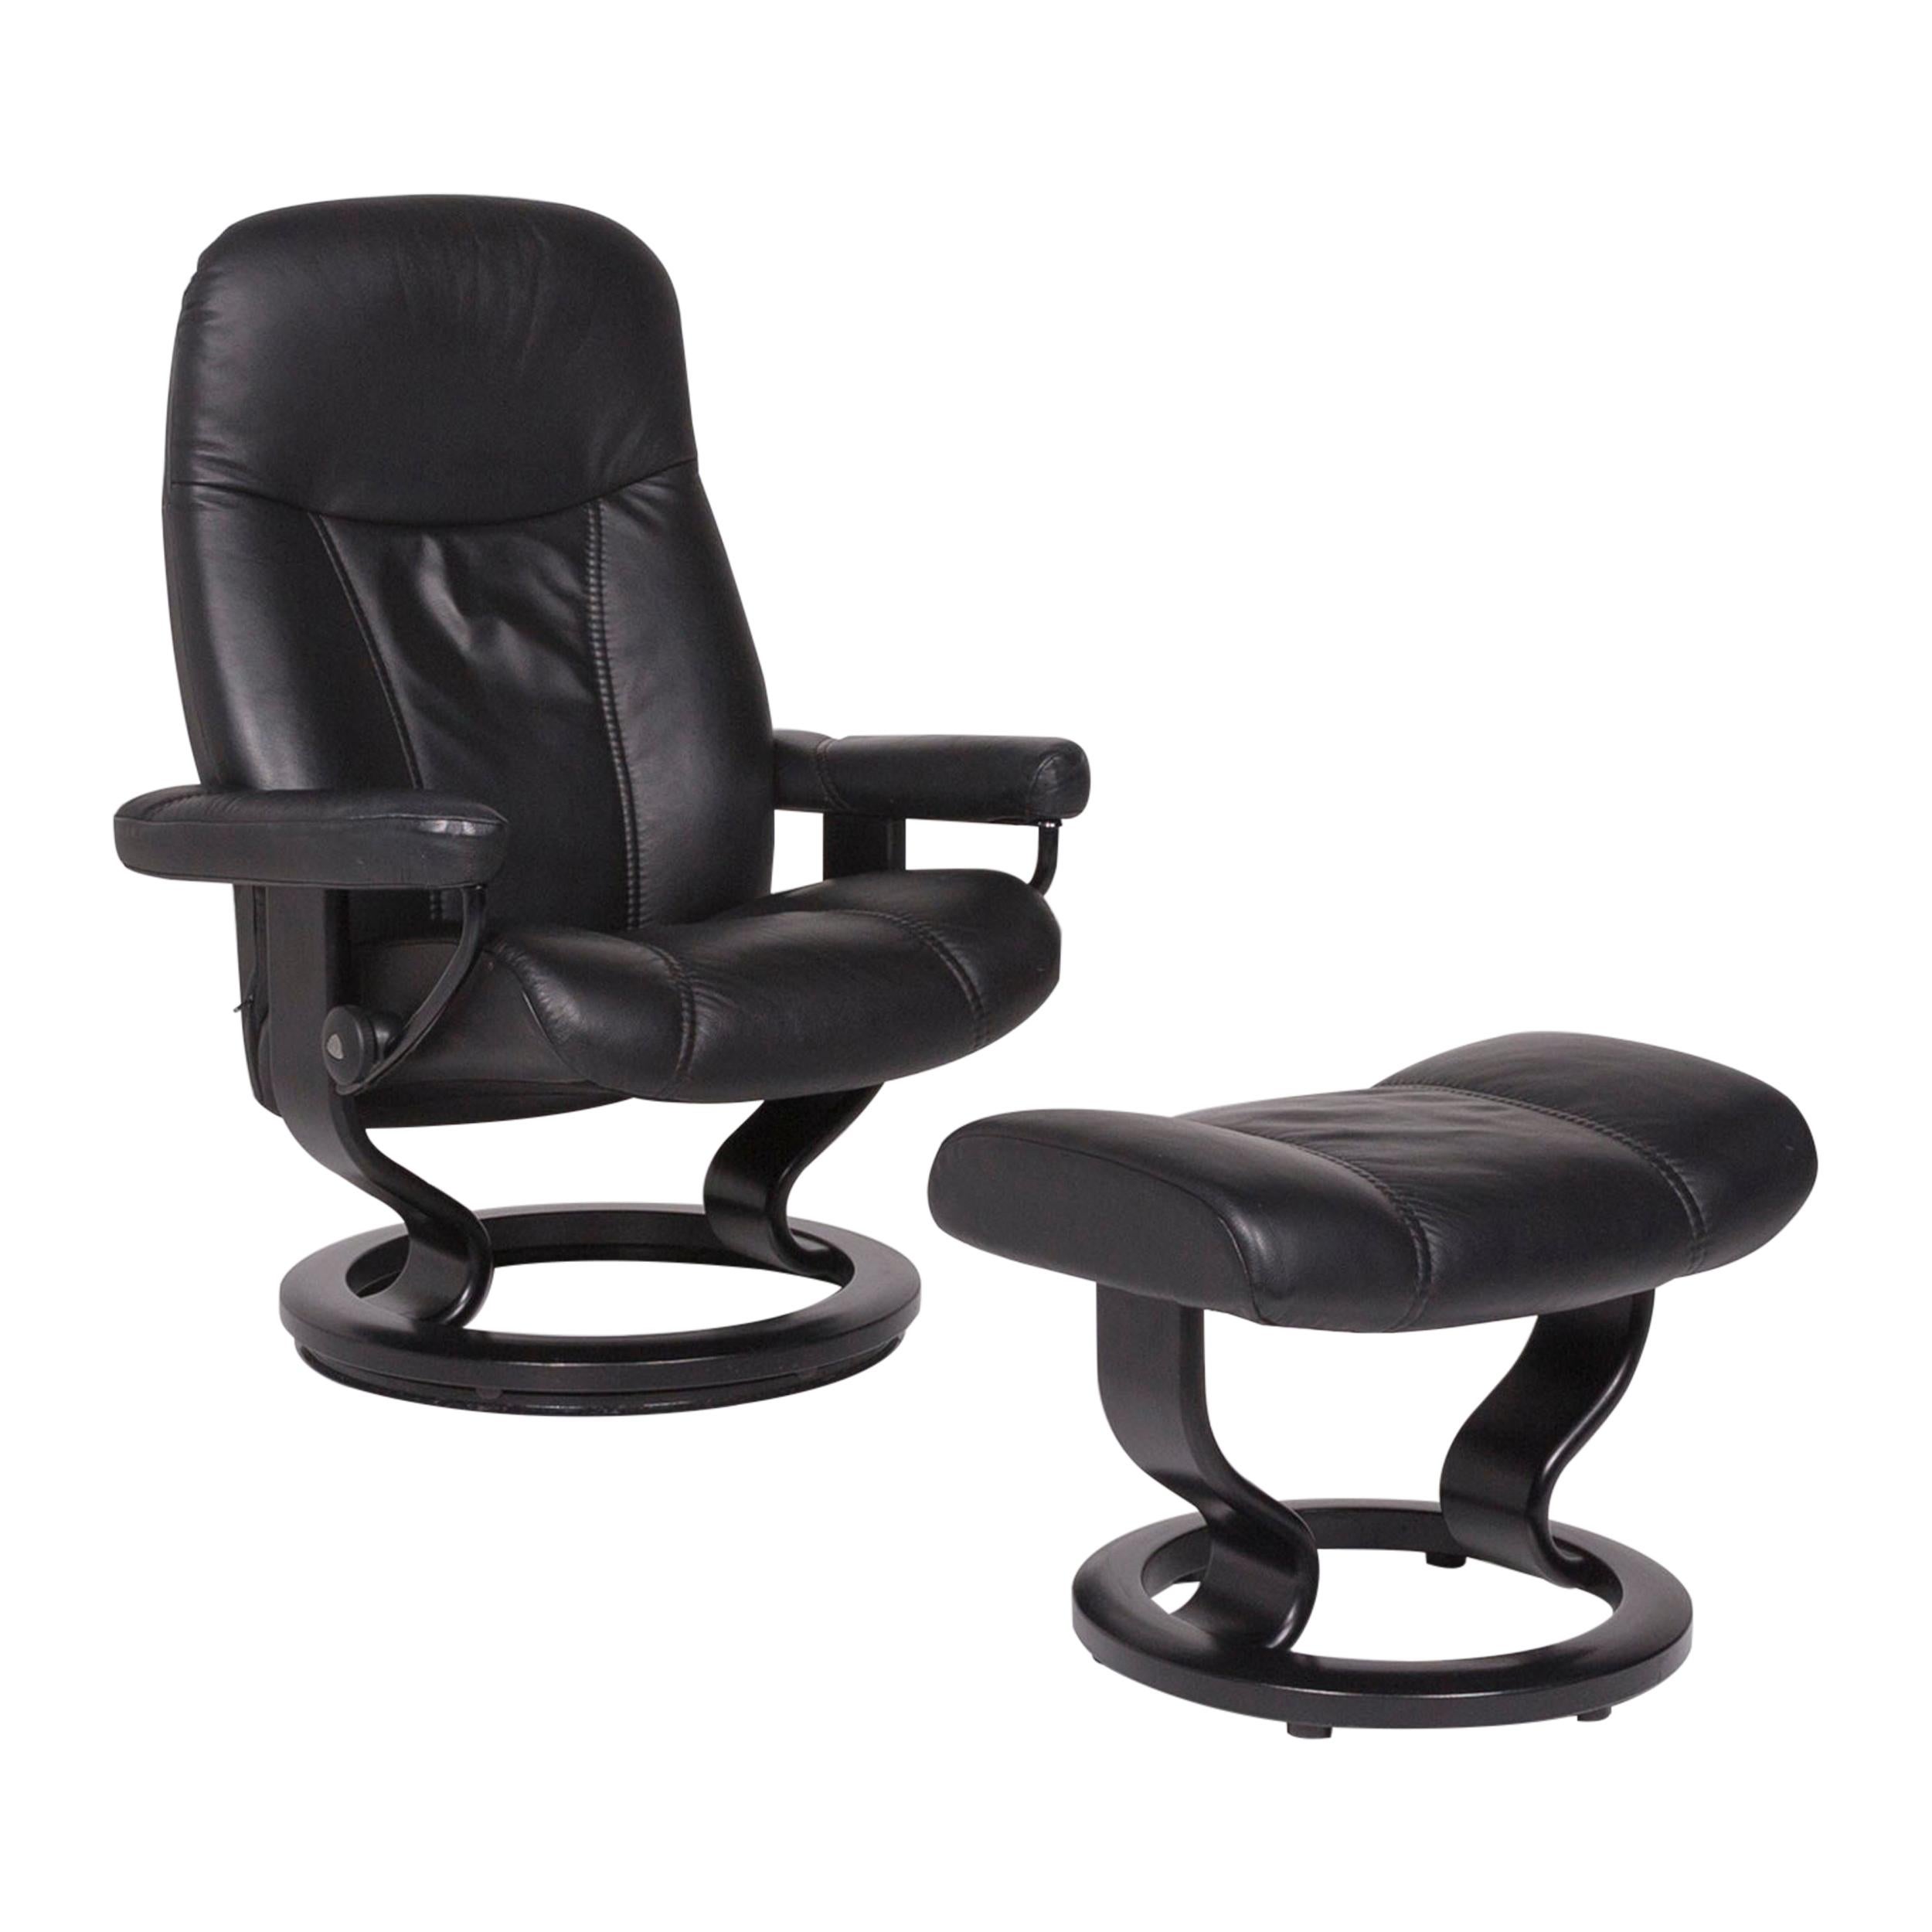 Stressless Consul Leather Armchair Black Incl. Stool Size M Relax Function